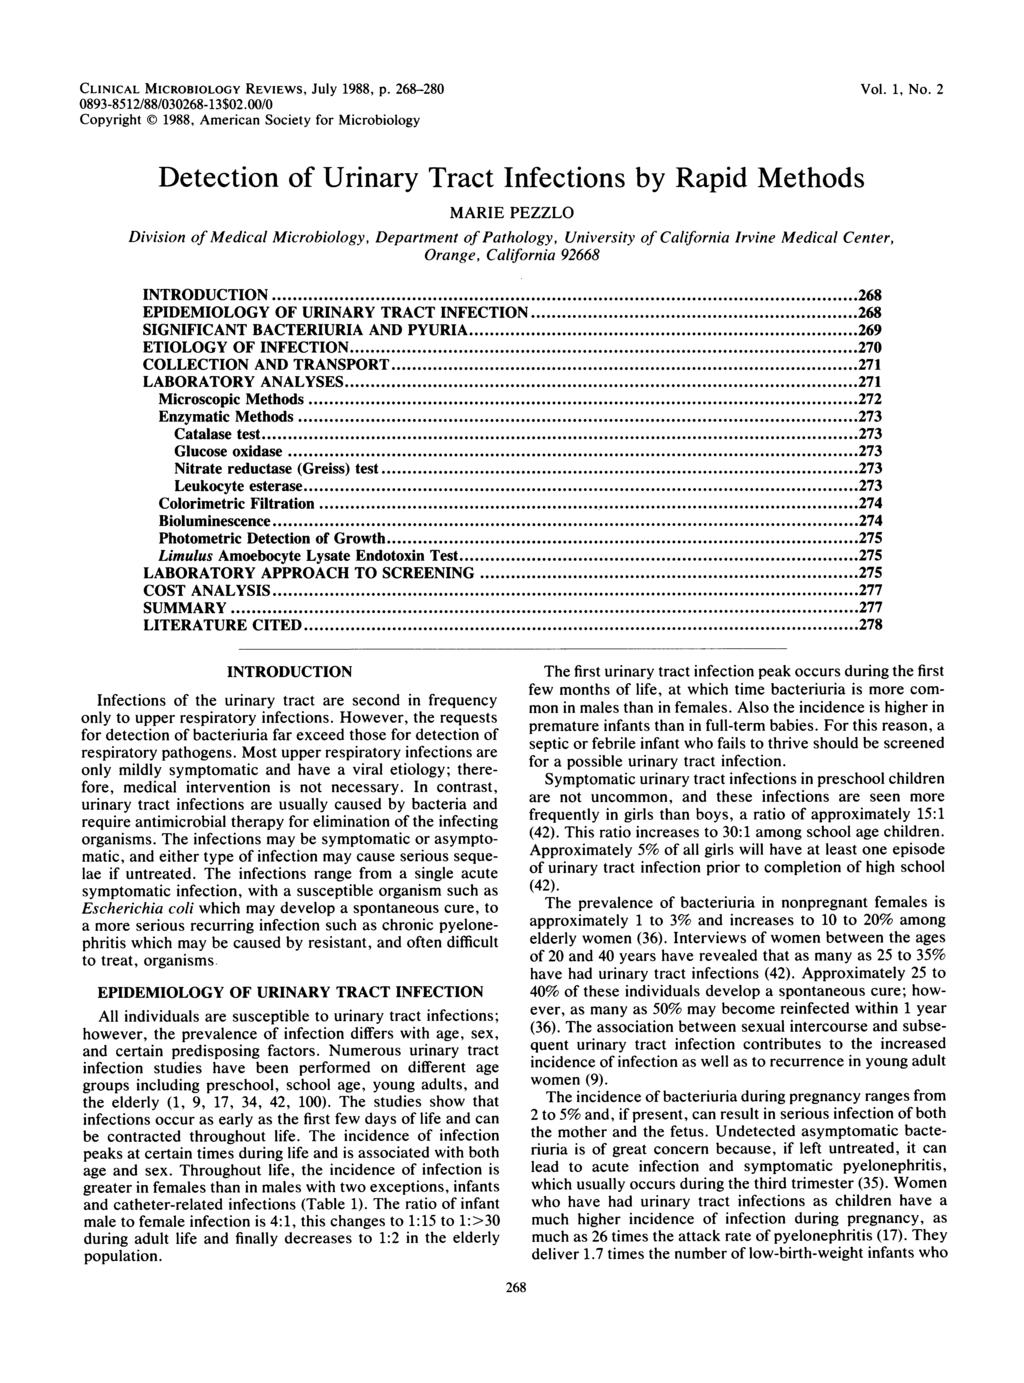 CLINICAL MICROBIOLOGY REVIEWS, JUly 1988, p. 268-280 Vol. 1, No. 2 0893-8512/88/030268-13$02.